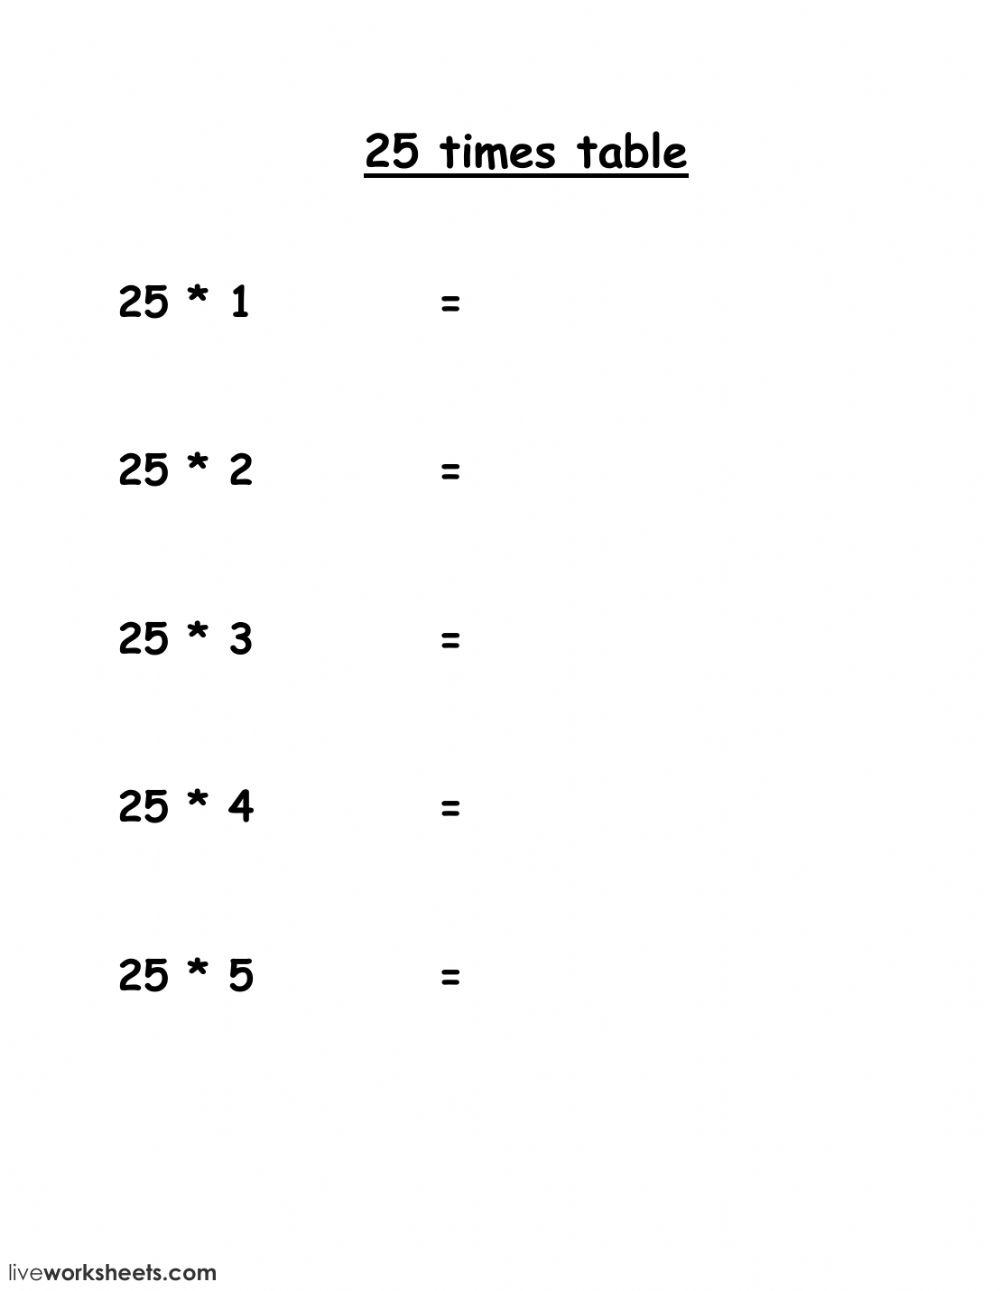 25 times table